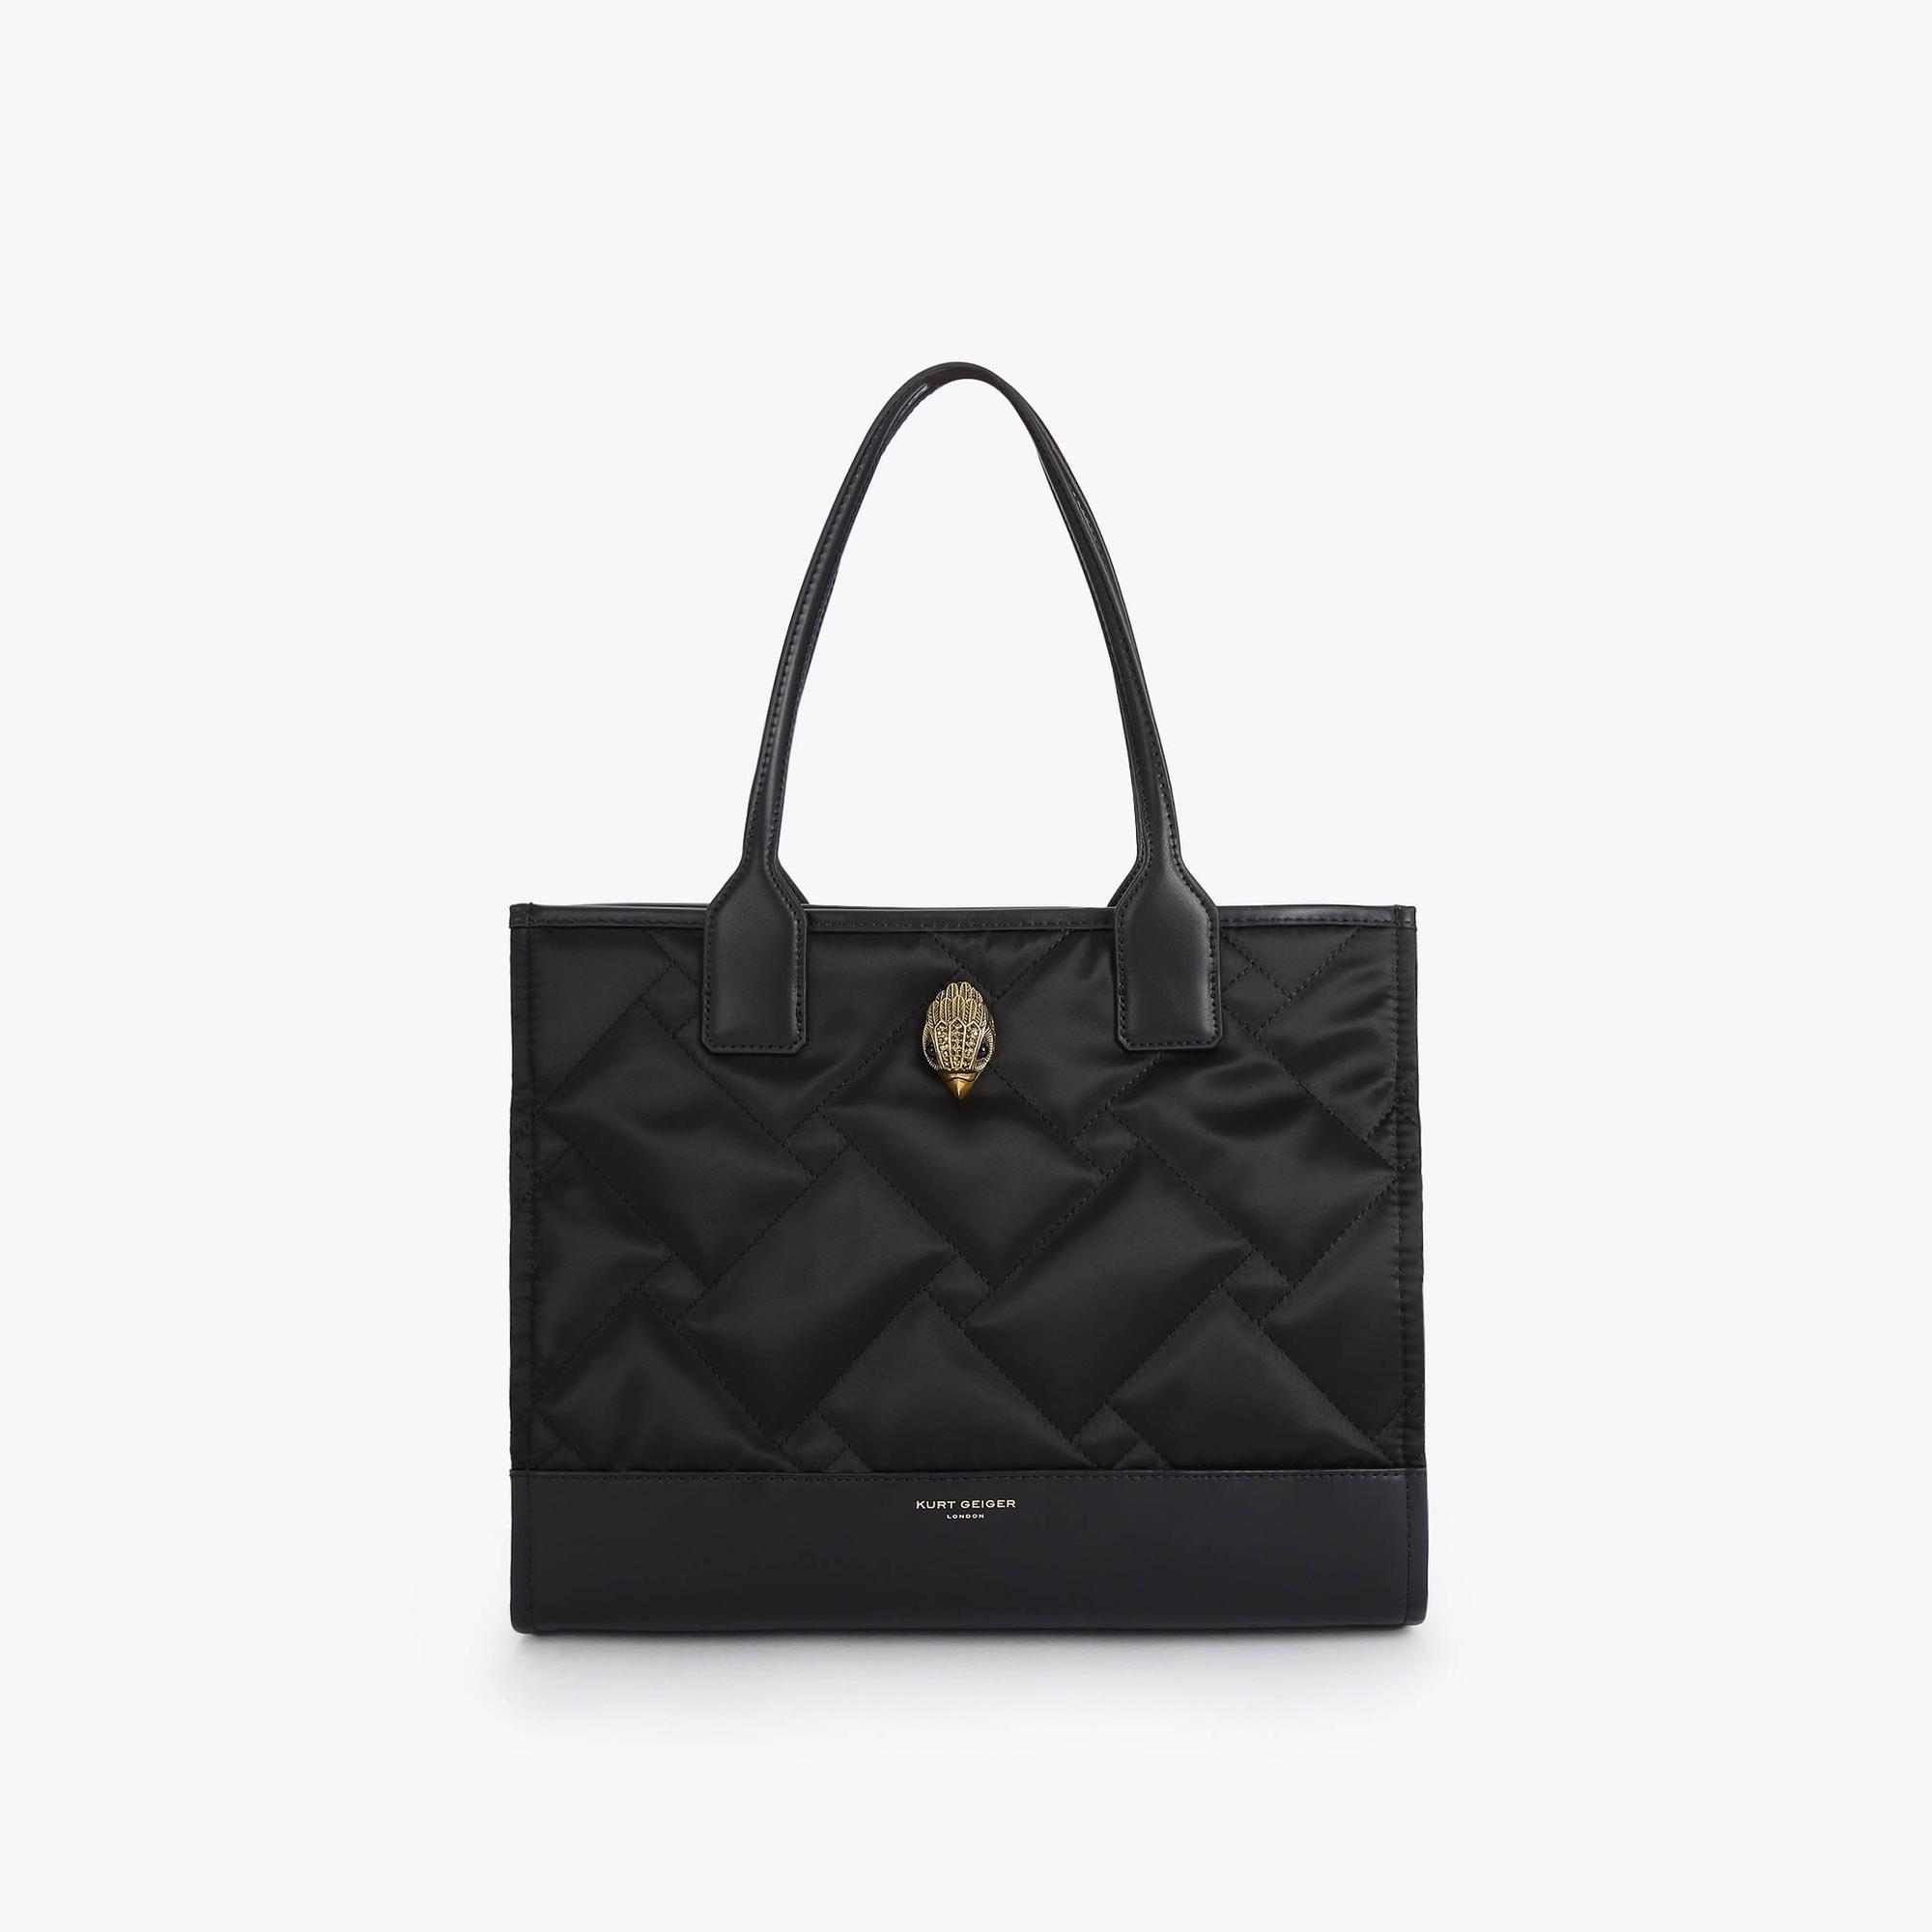 RECYCLED SQ SM SHOPPER Small Black Quilted Recycled Shopper Bag by KURT GEIGER LONDON